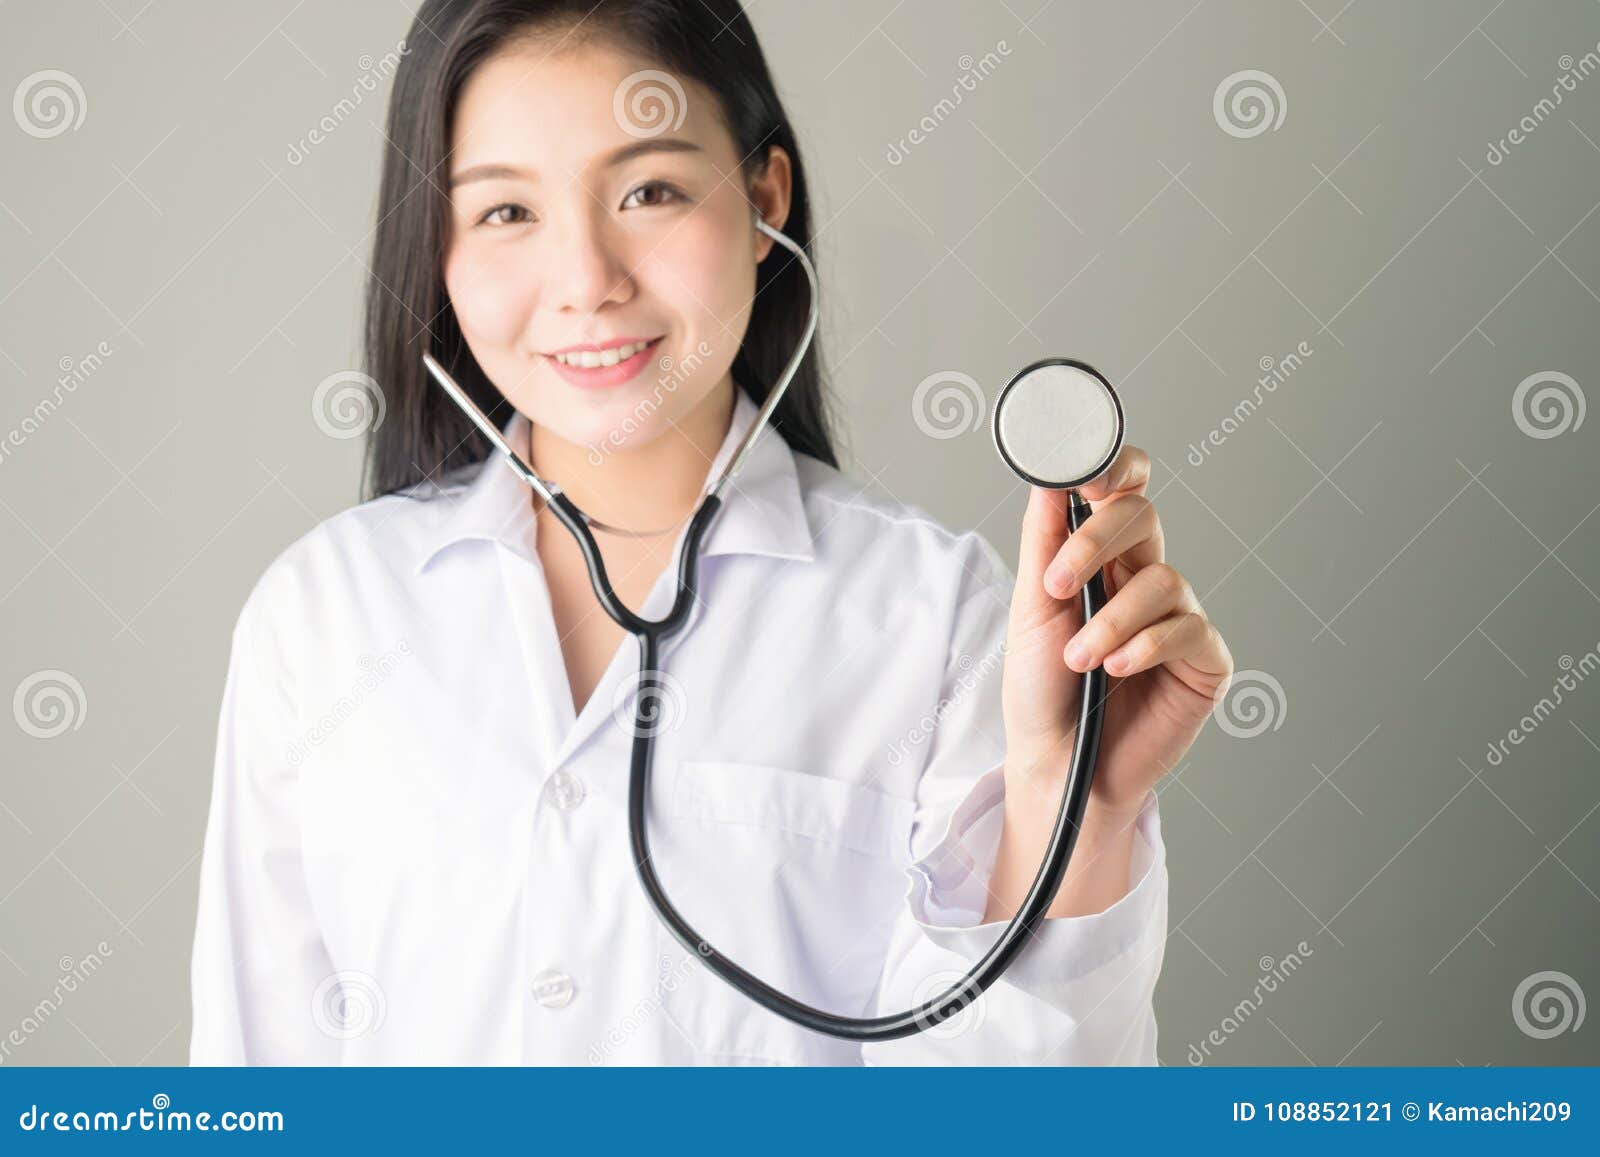 https://thumbs.dreamstime.com/z/doctor-uses-stethoscope-to-catch-up-lift-used-check-patient-108852121.jpg